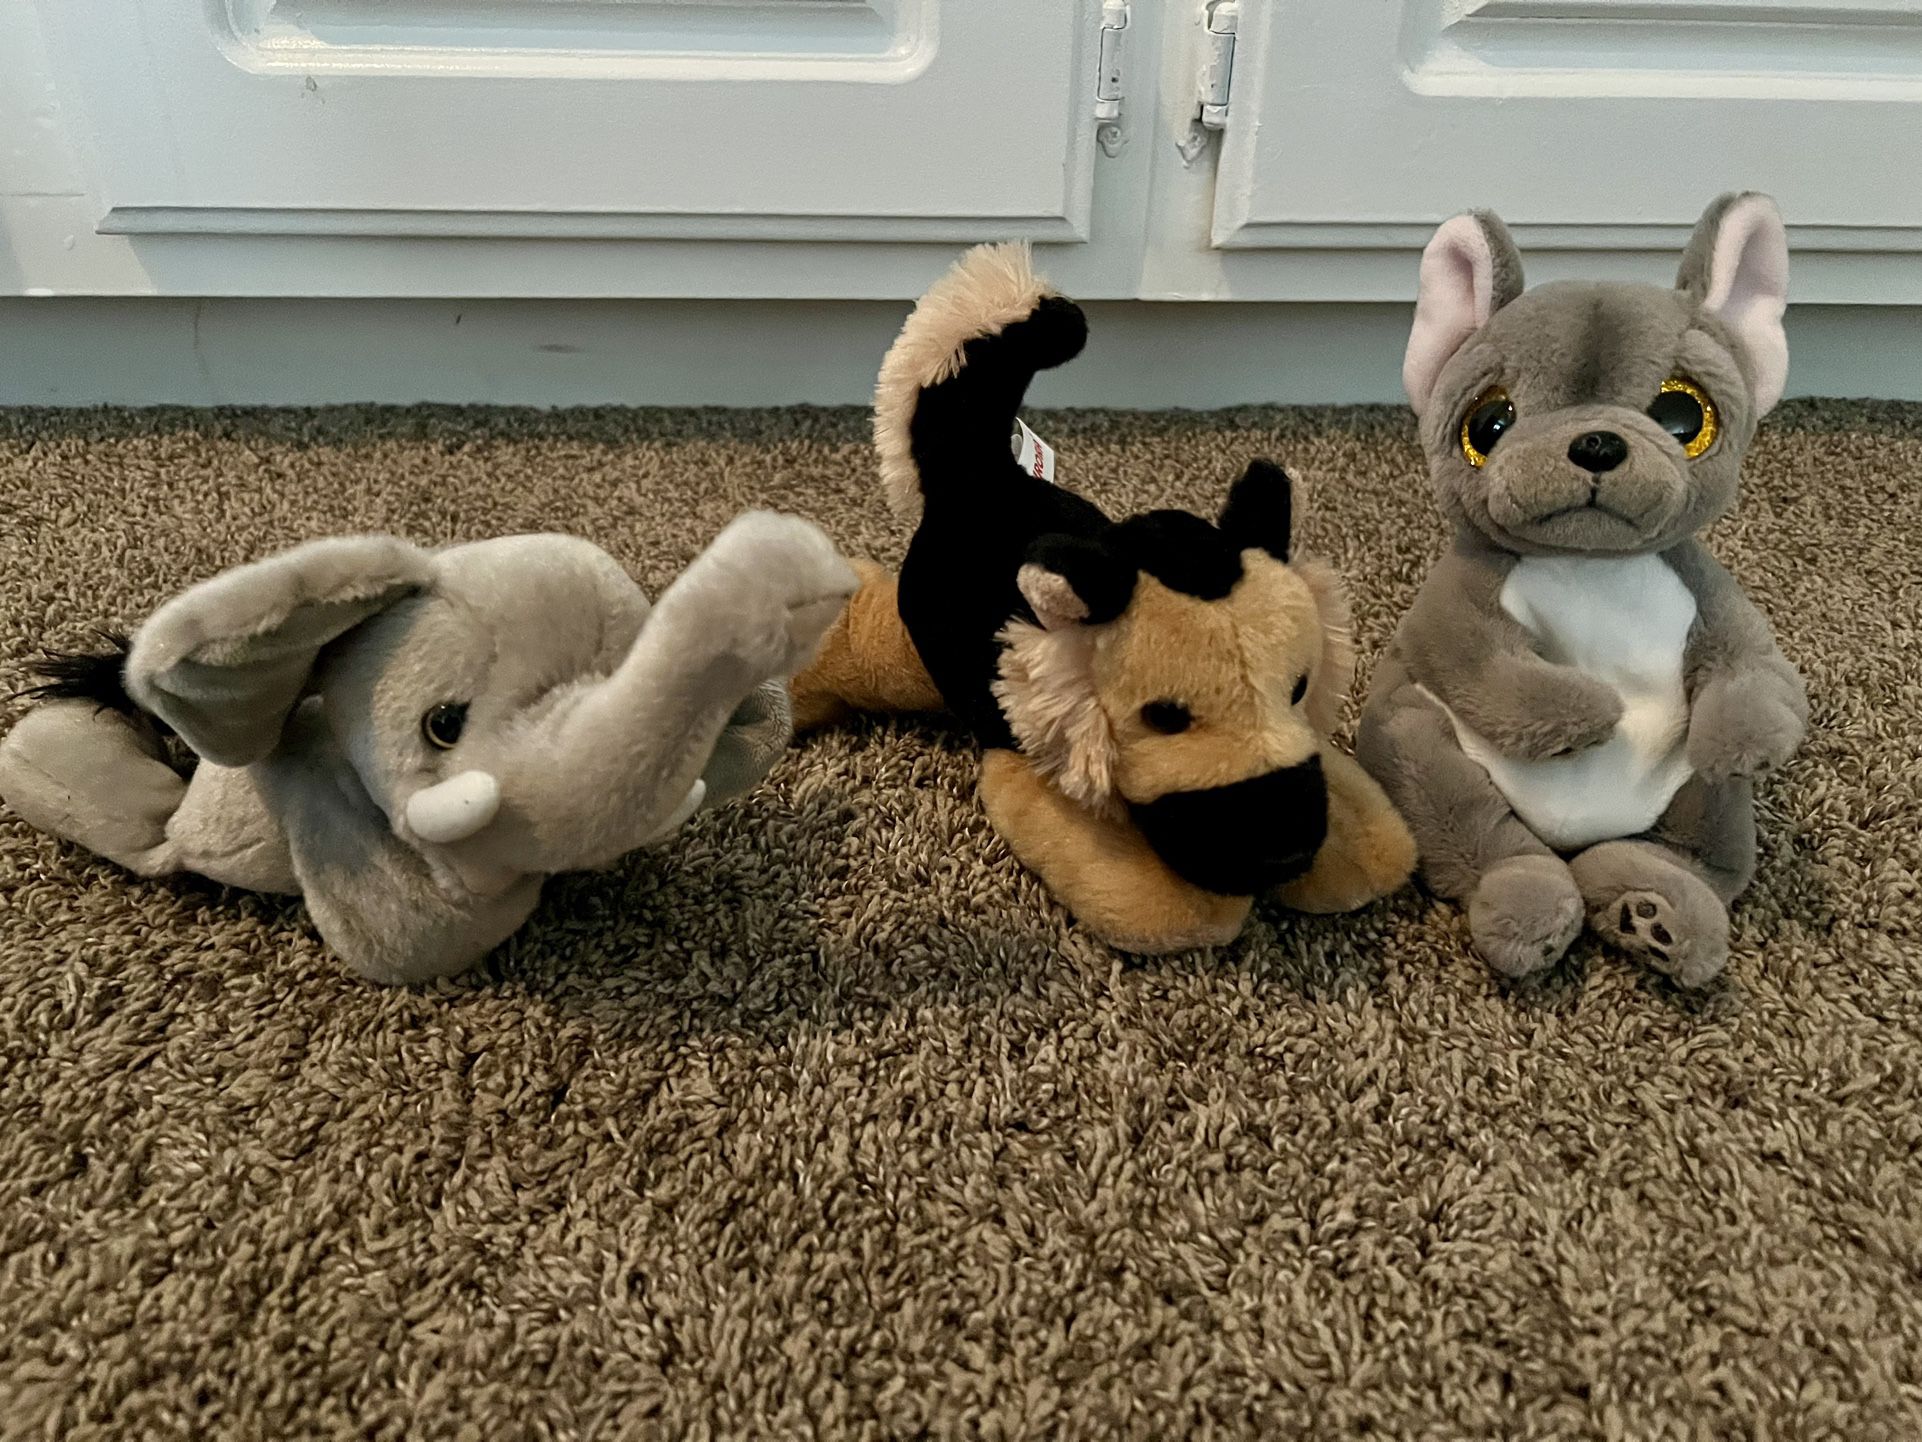 Elephant, Fox, And Puppy Plushies  